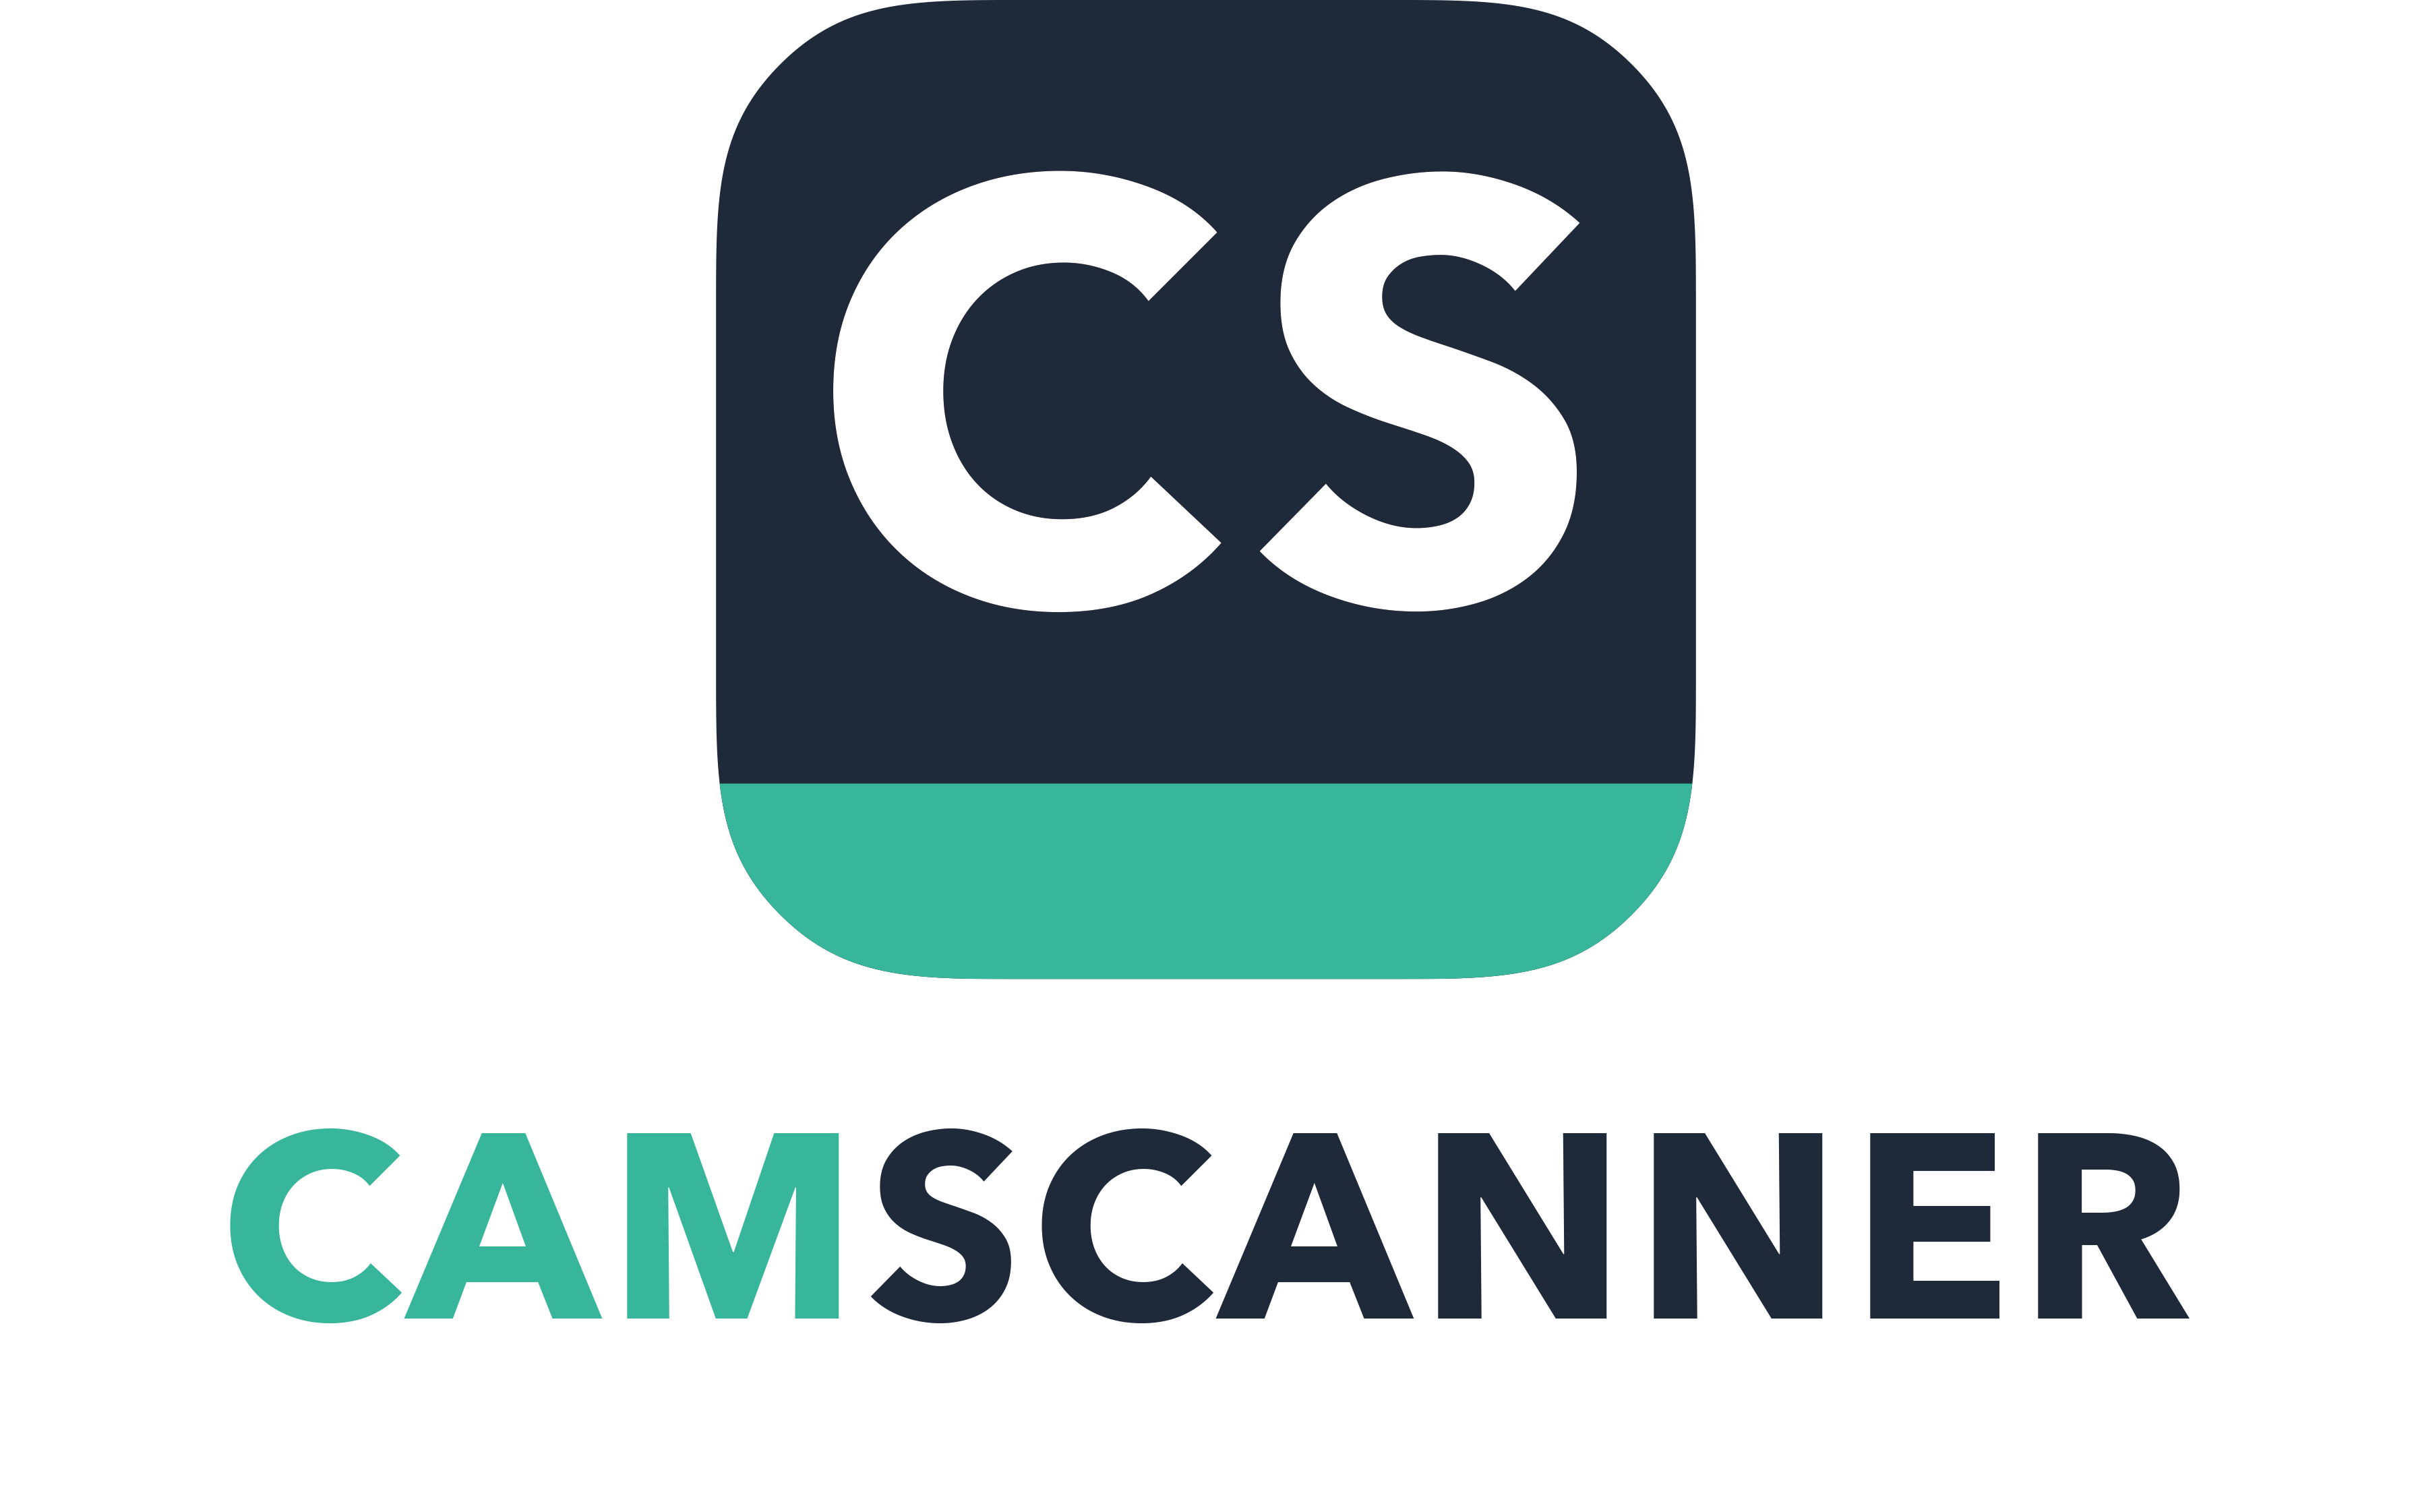 CamScanner Launches Magic Pro Filter to Make Scanned Documents Perfect with Just One Click